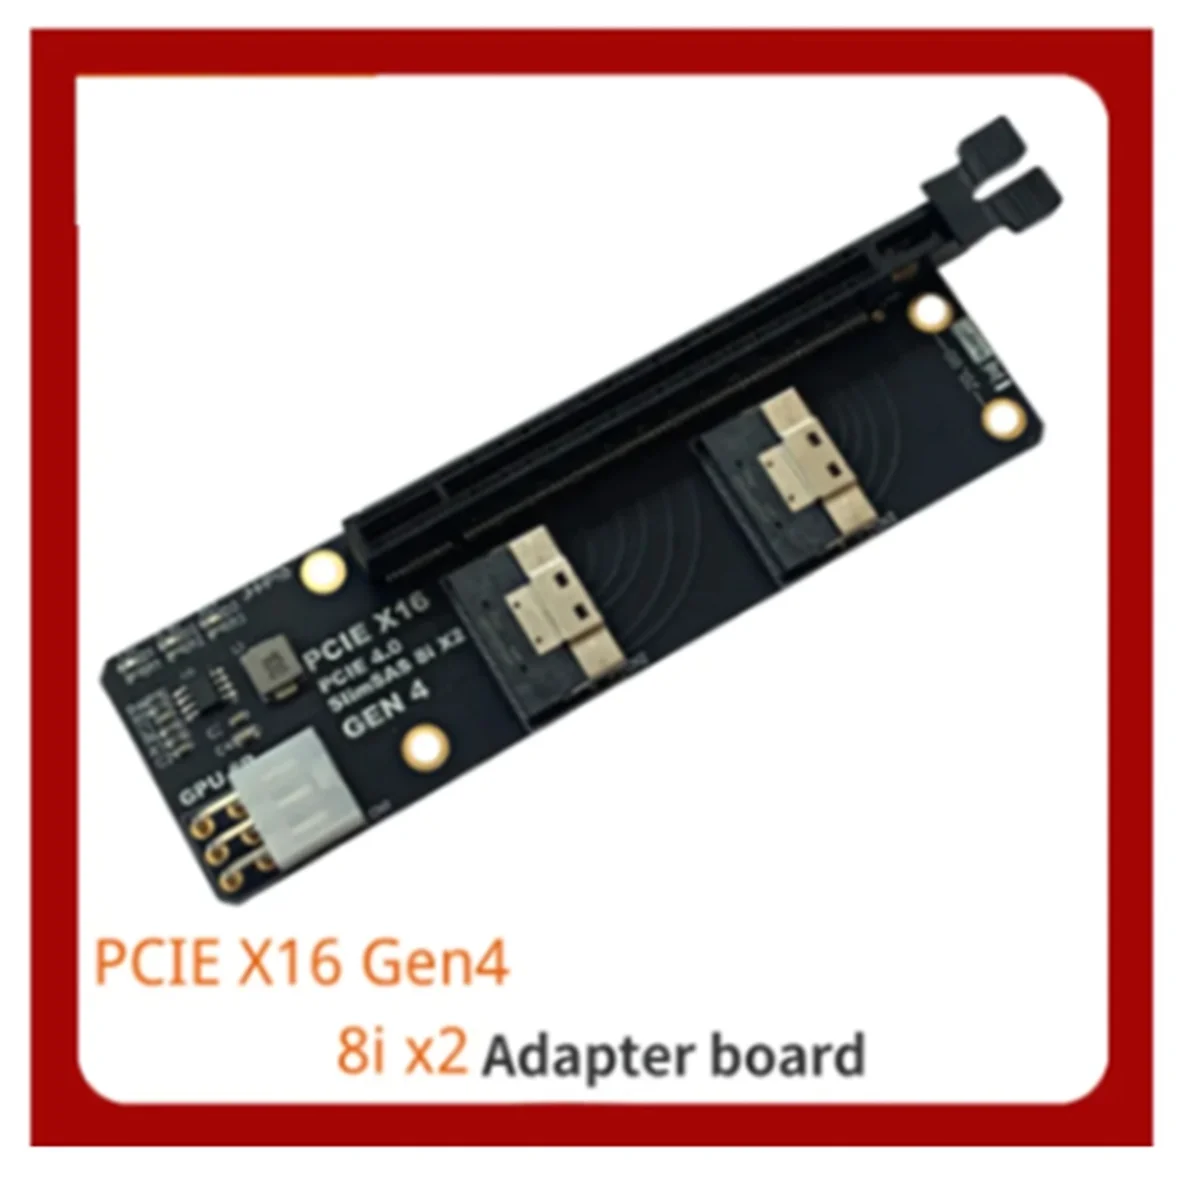 Gen4 2 Ports SlimSAS 8I X2 to PCIE 4.0 X16 Slot Adapter Board for Network Card Graphics Video Card Capture